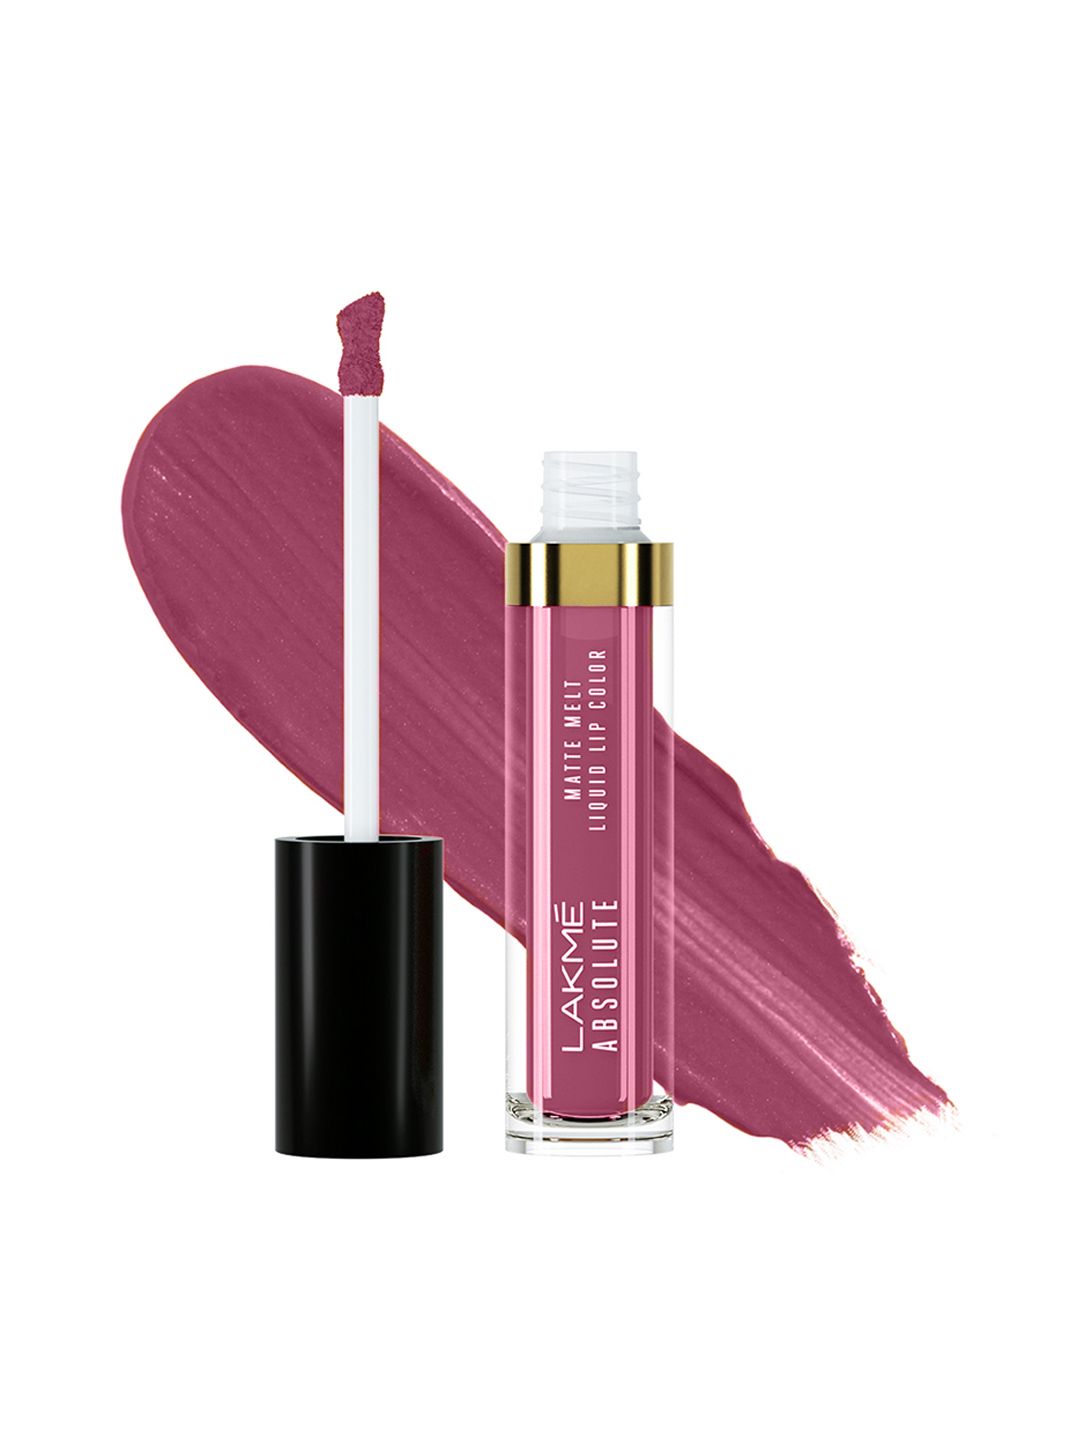 Lakme Absolute Matte Melt Liquid Lip Color - 231 Starlet Pink Price in India